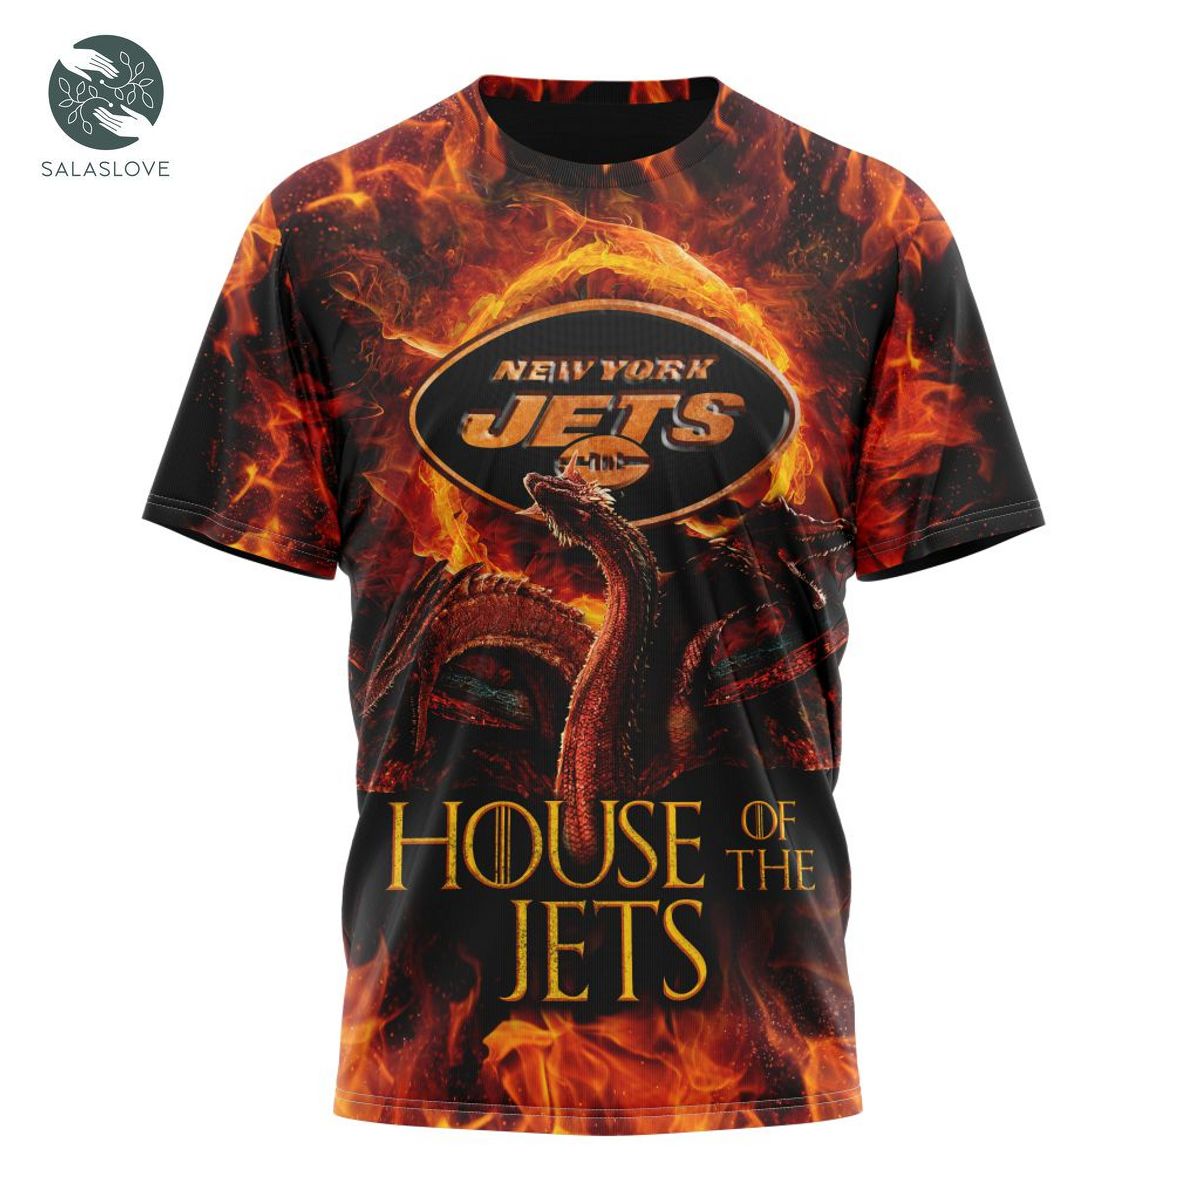 NFL New York Jets GAME OF THRONES – HOUSE OF THE JETS Shirt